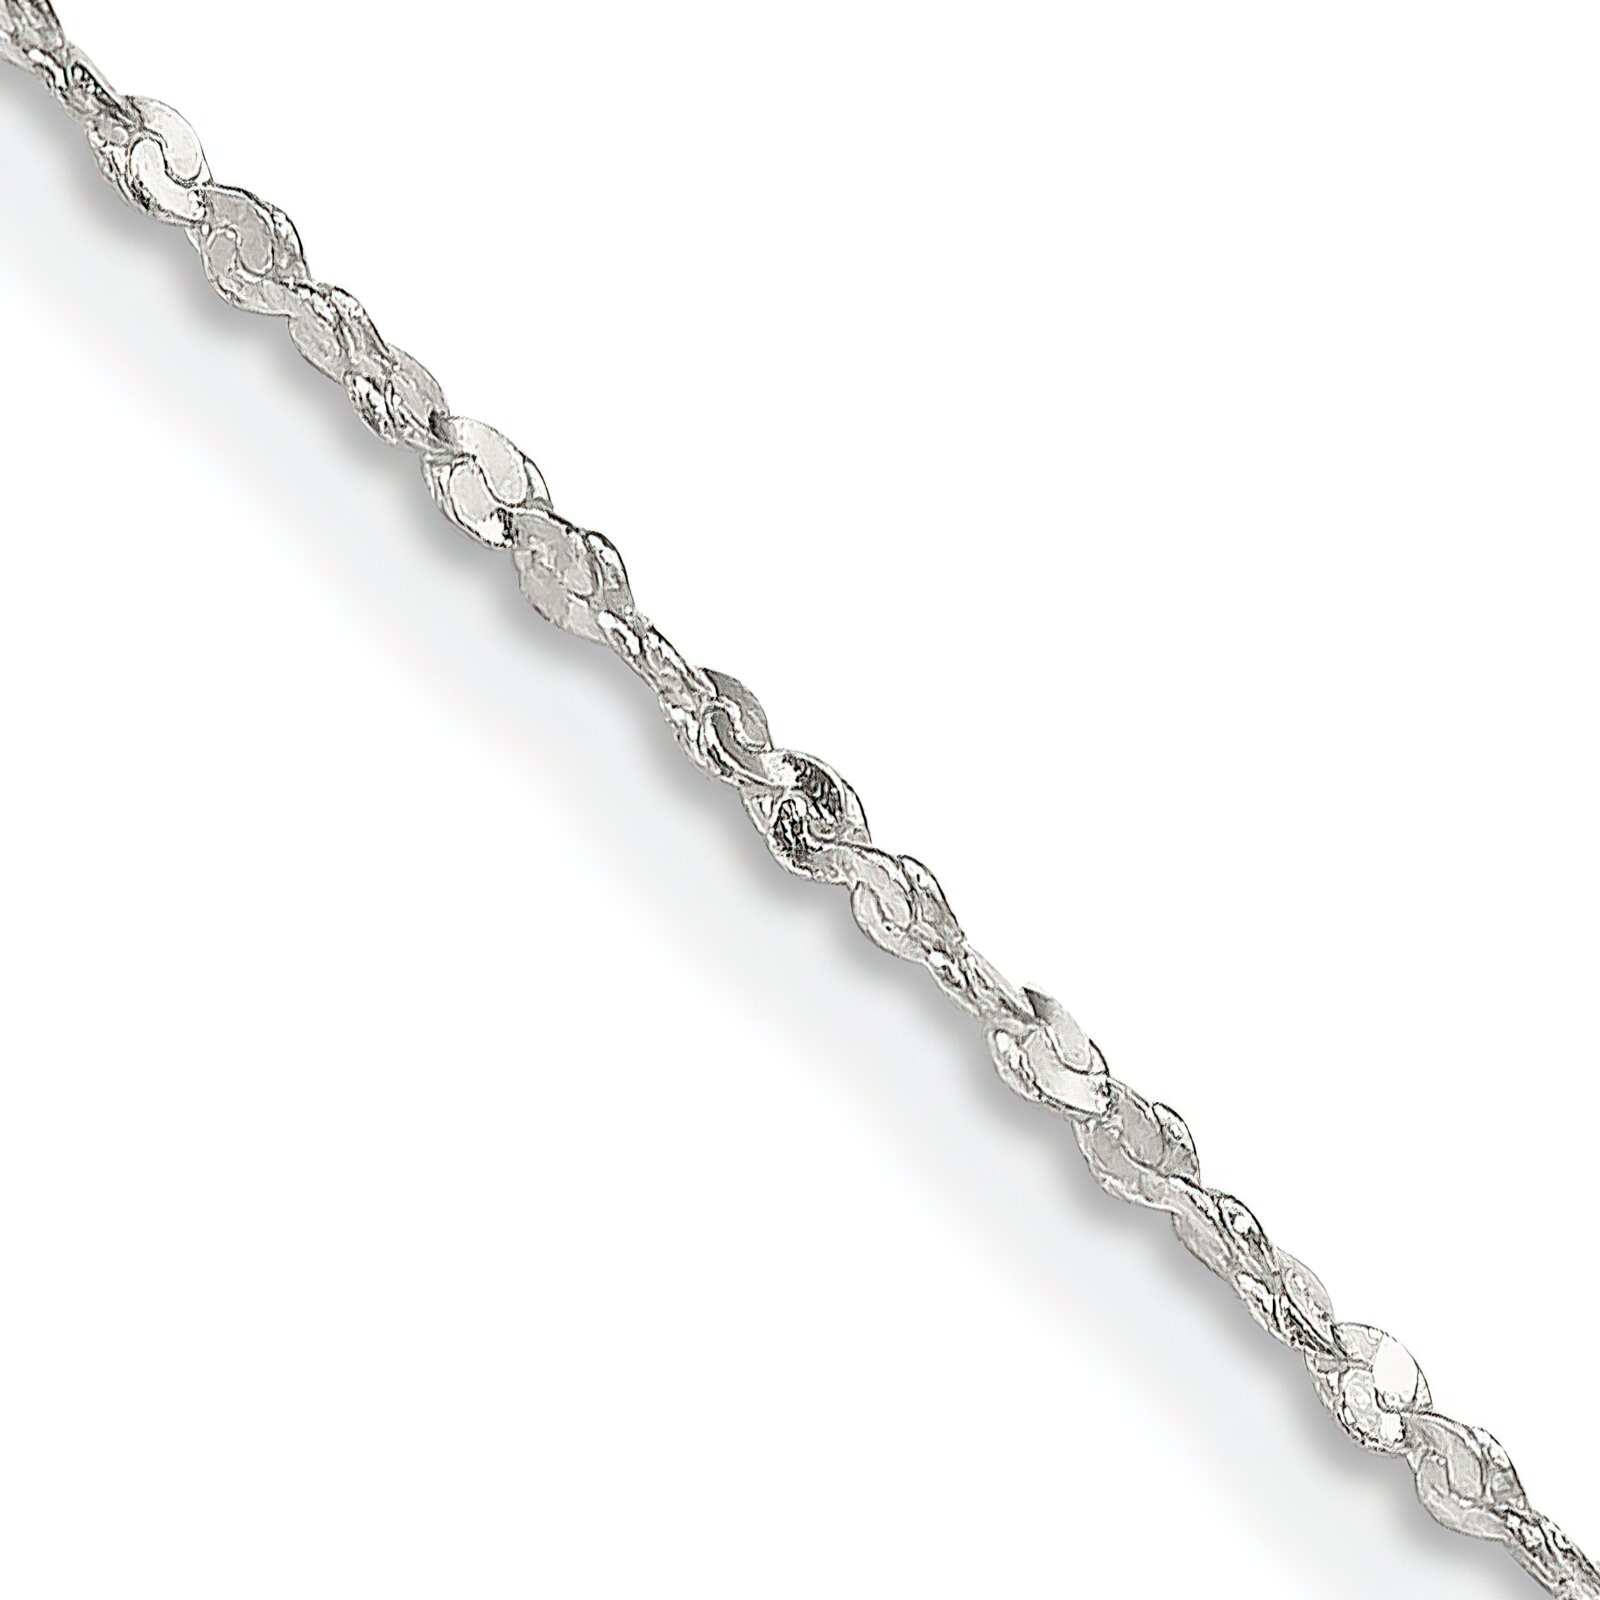 Findingking Sterling Silver Twisted serpentine Chain 16"